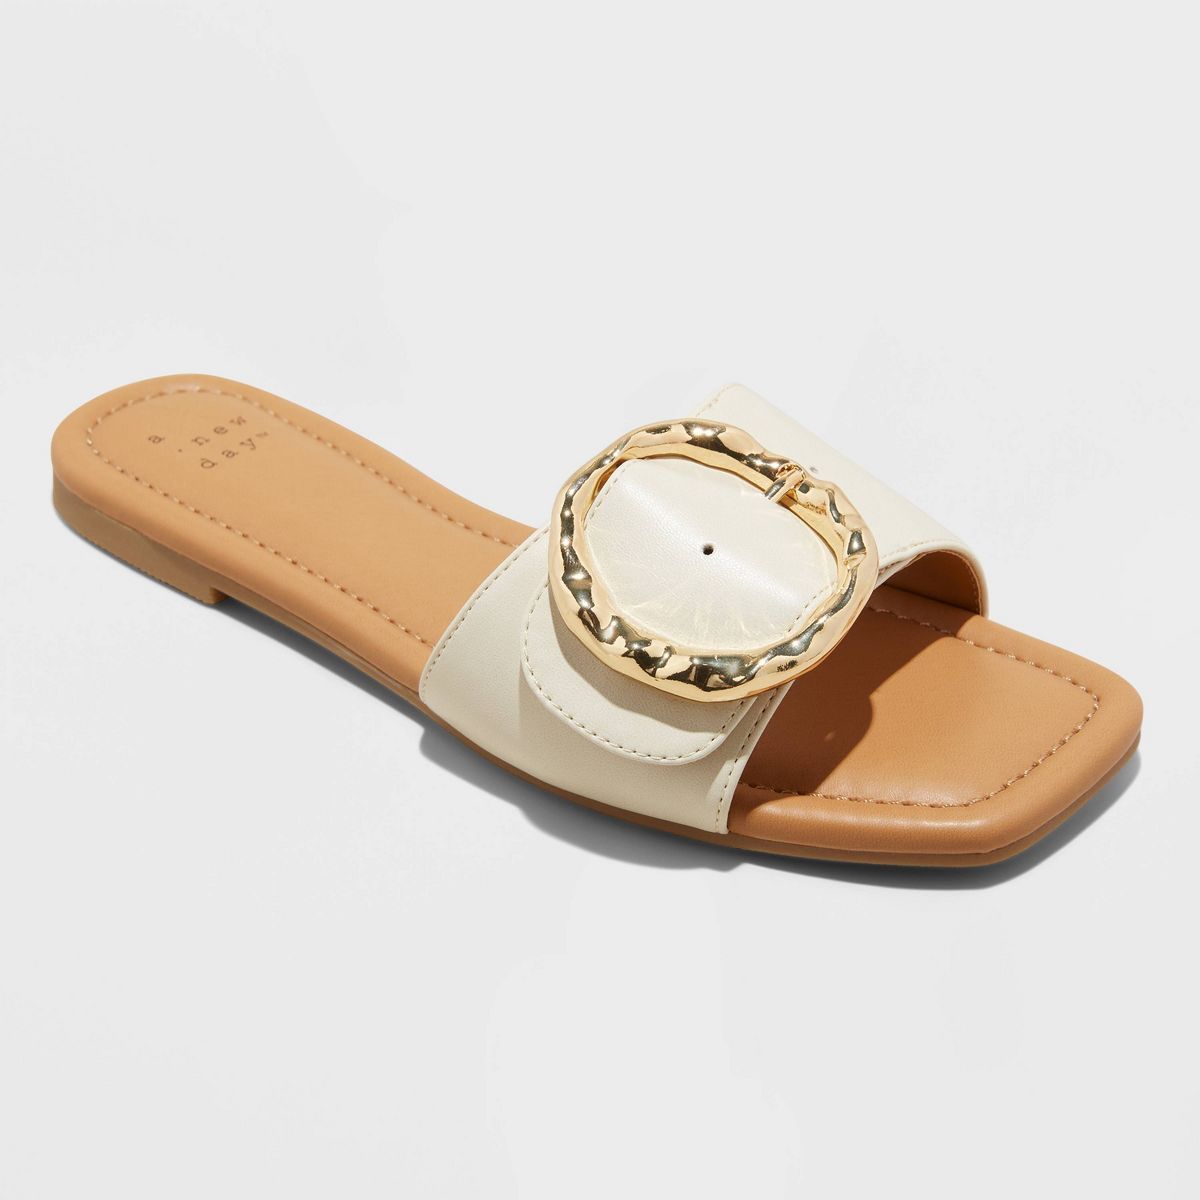 Women's Bennie Buckle Slide Sandals with Memory Foam Insole - A New Day™ Cream 5 | Target